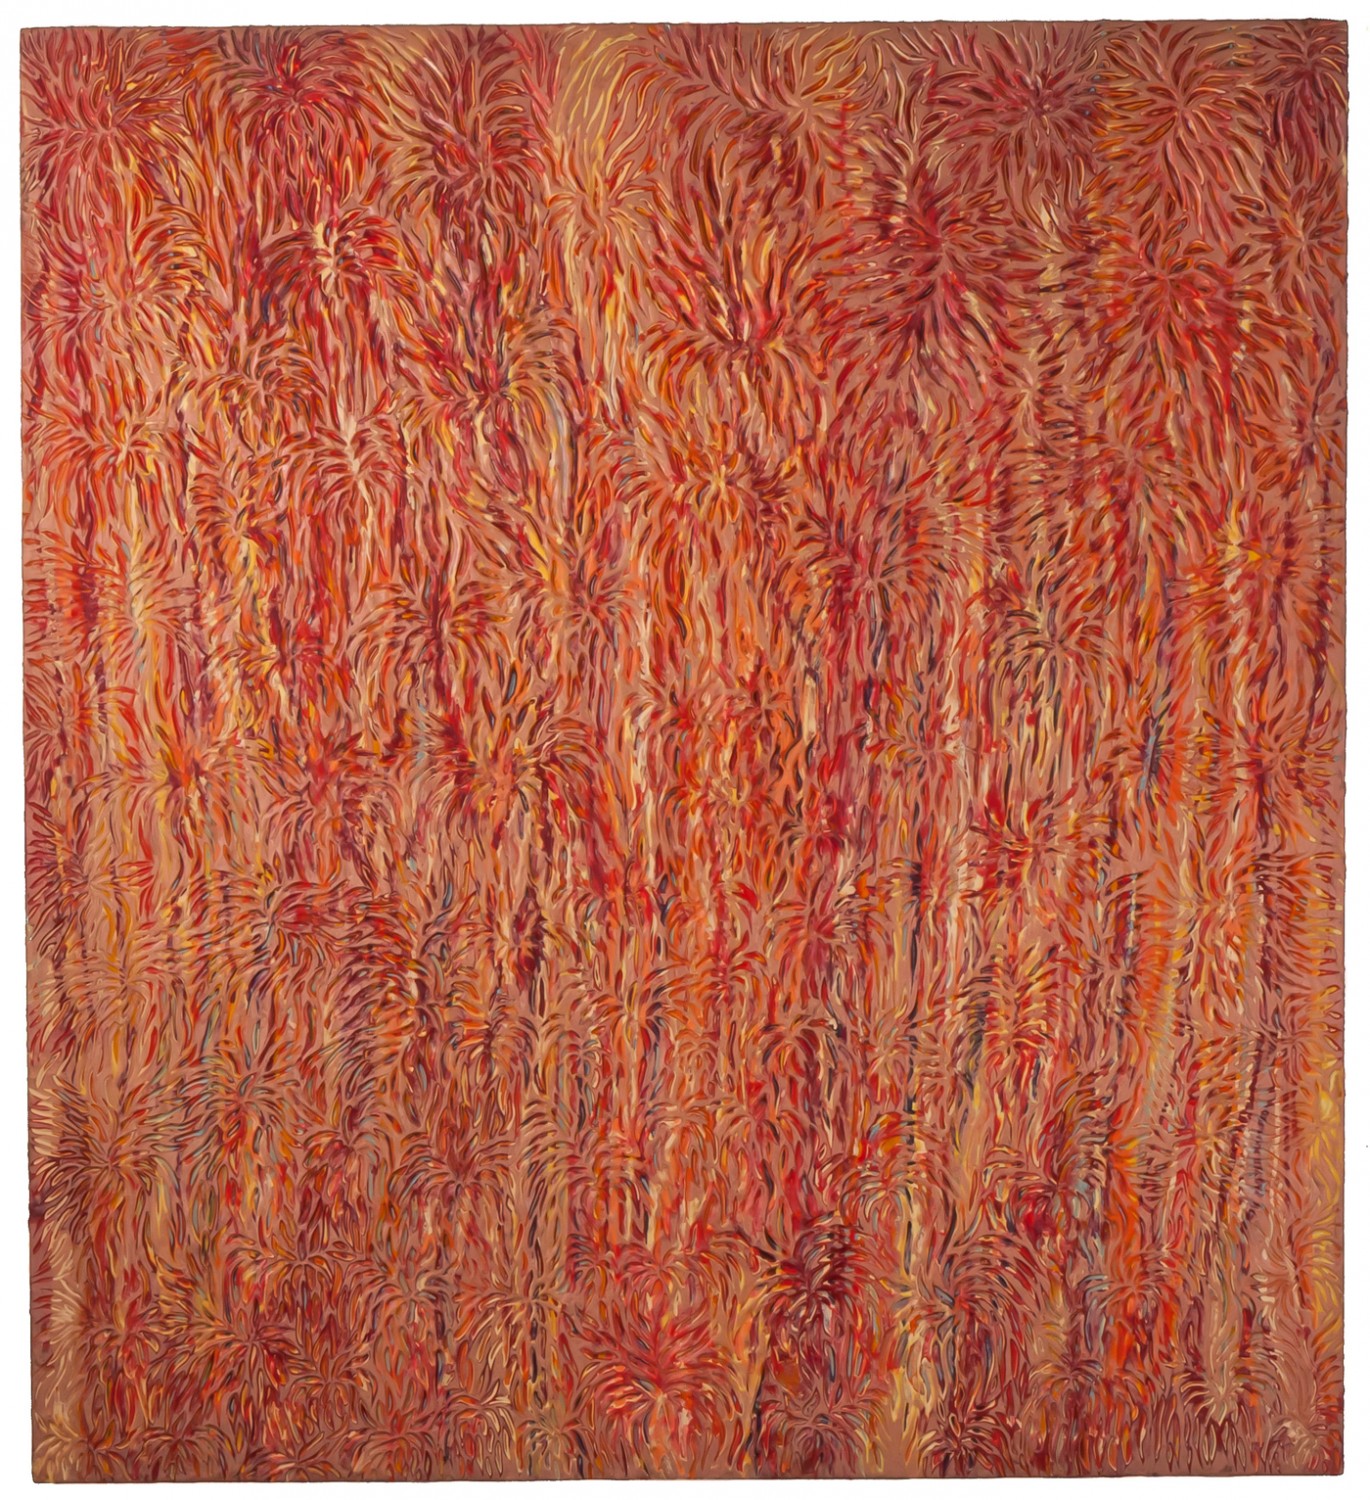 Current, 2008, encaustic on panel, 66 x 60 inches